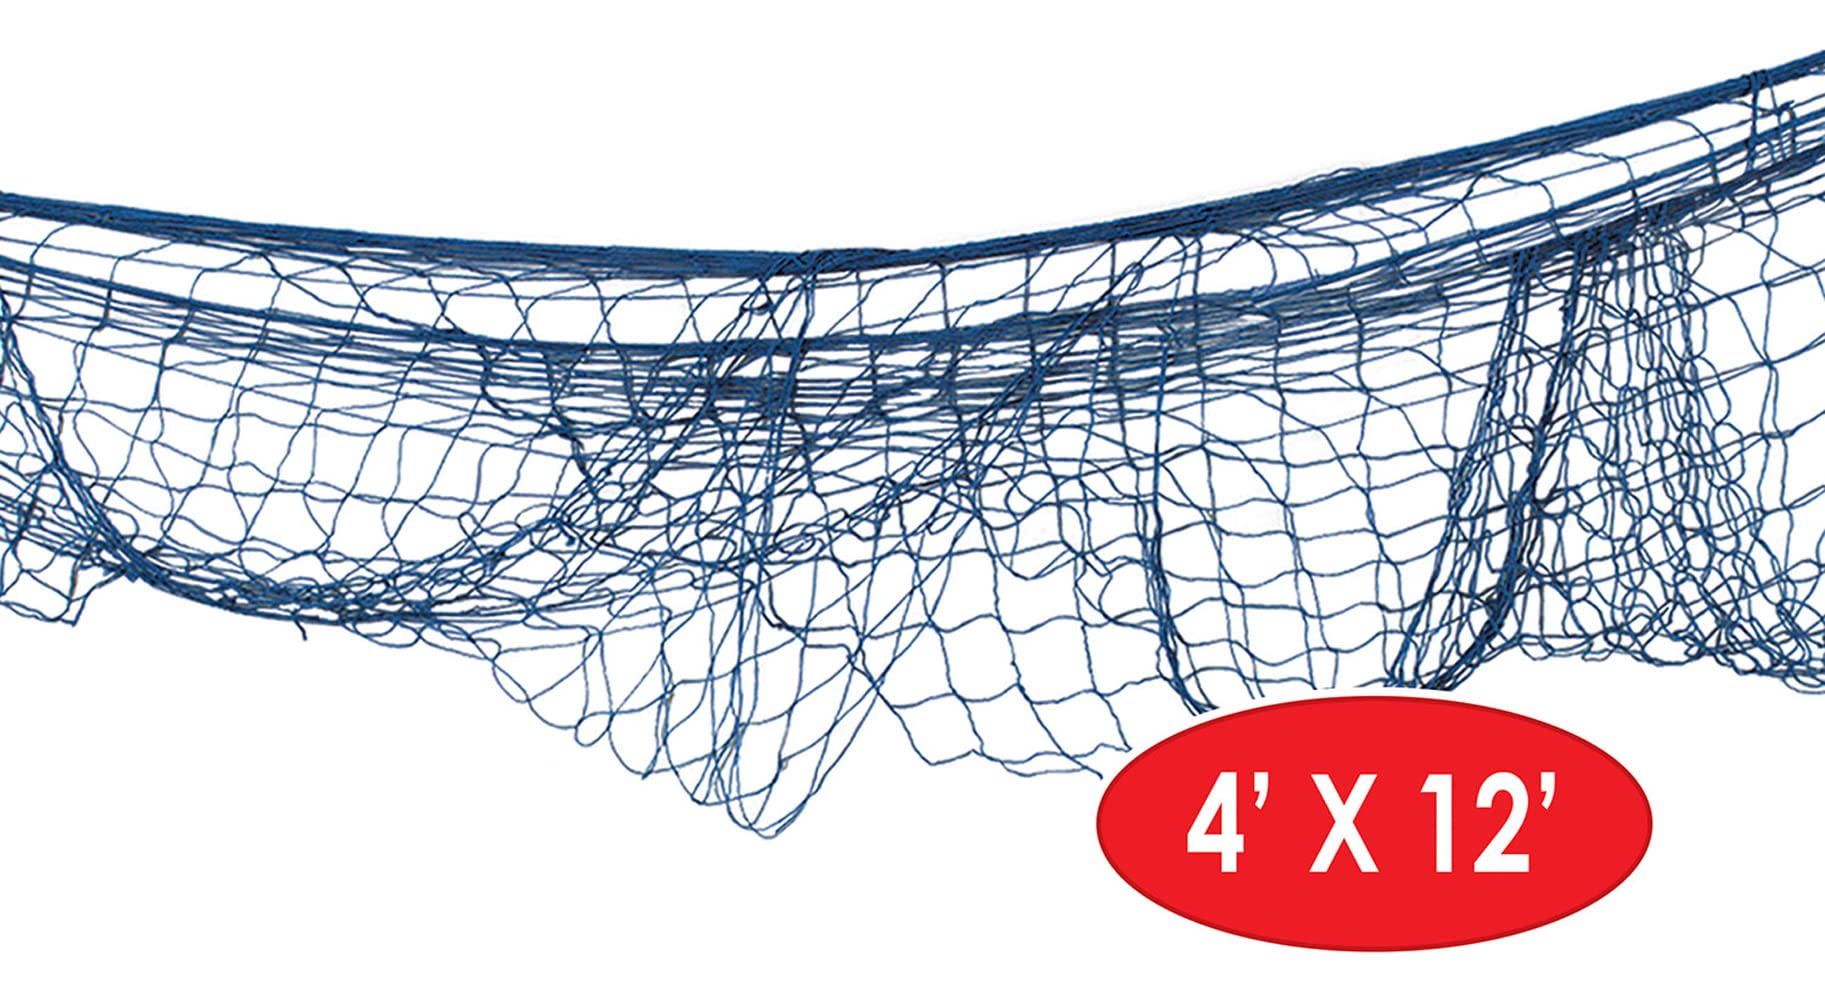 Beistle Blue Cotton String Novelty Nautical Decorative Fish Netting Under The Sea Luau Party Supplies, 4' x 12'